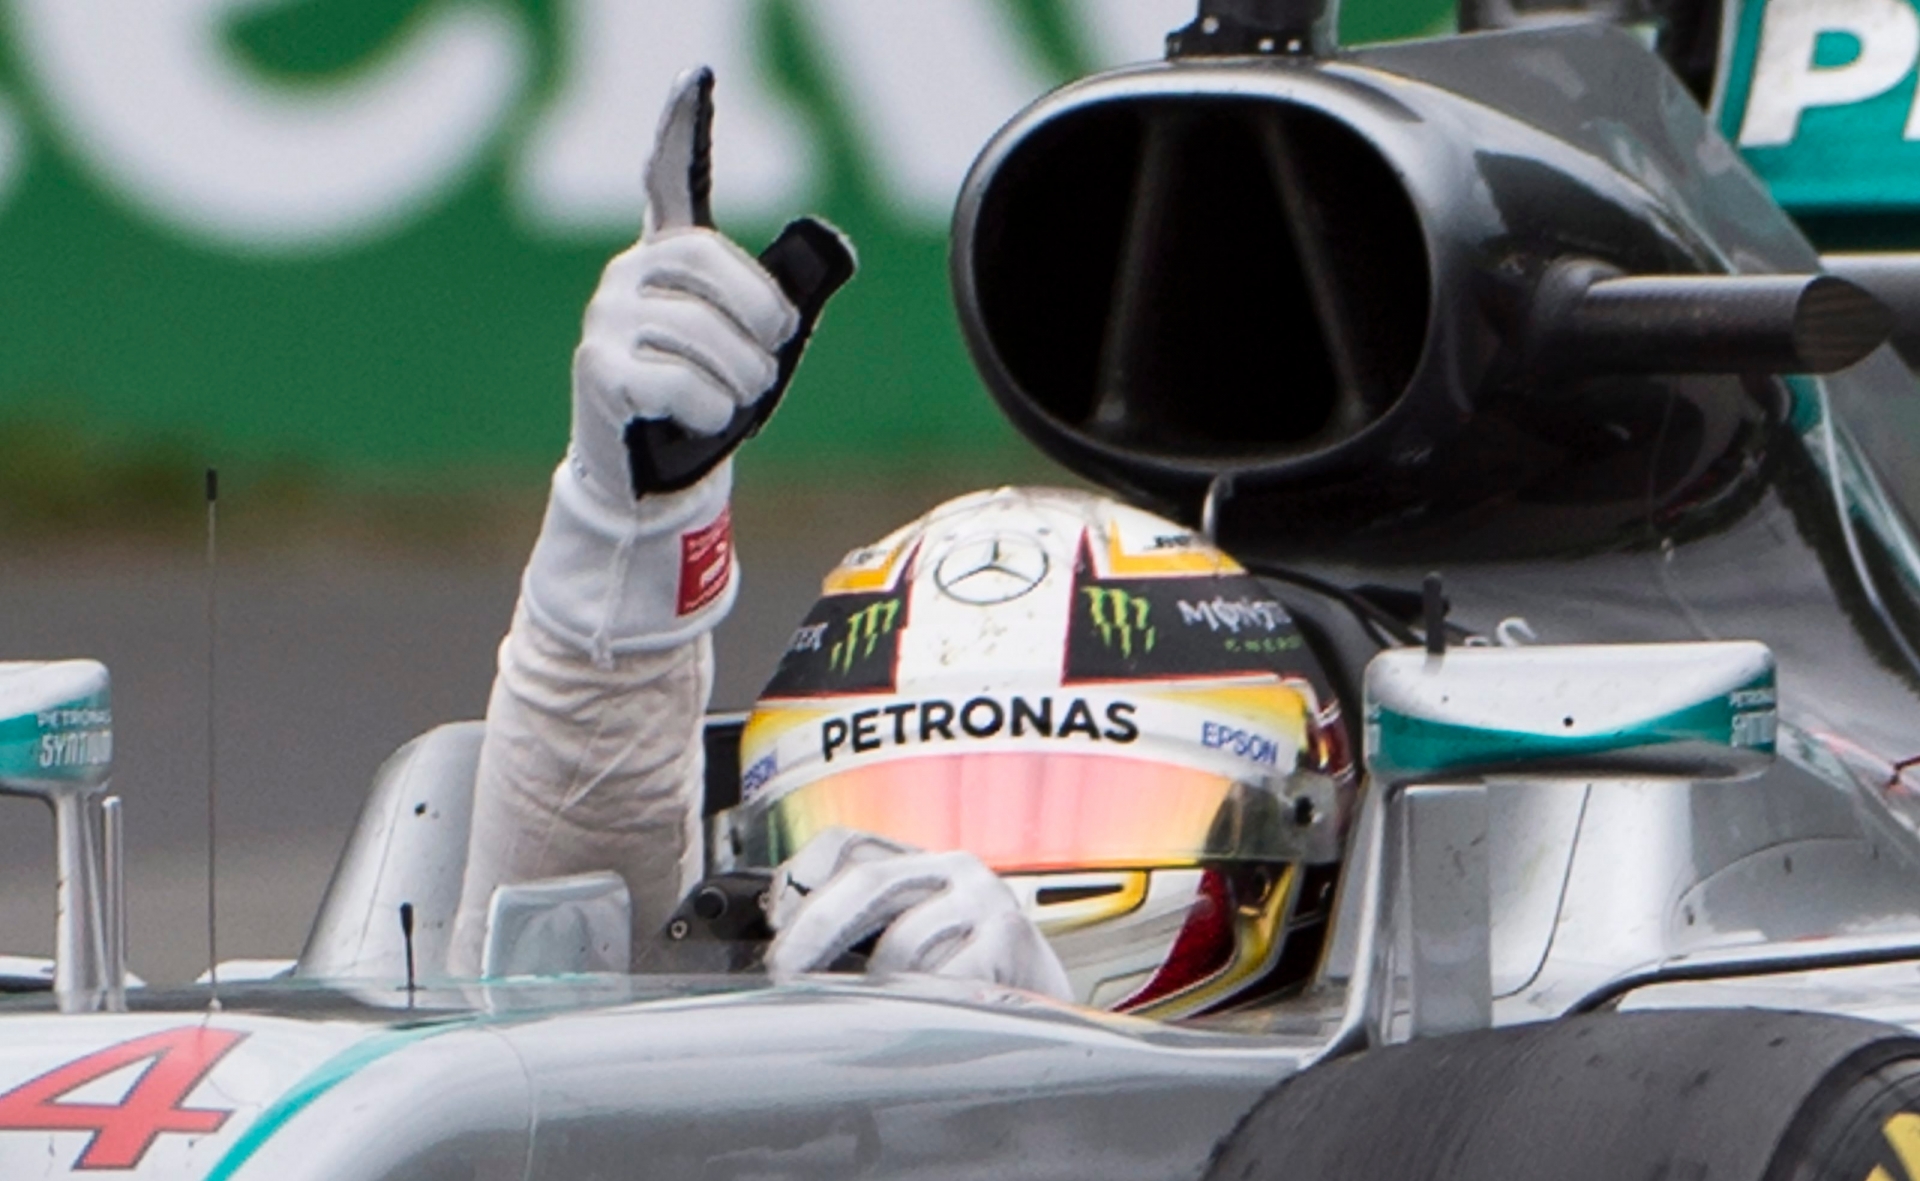 Mercedes driver Lewis Hamilton, of Britain, signals after winning the Canadian Grand Prix auto race in Montreal, Sunday, June 12, 2016. (Graham HUghes/The Canadian Press via AP) MANDATORY CREDIT F1 Canada Grand Prix Auto Racing